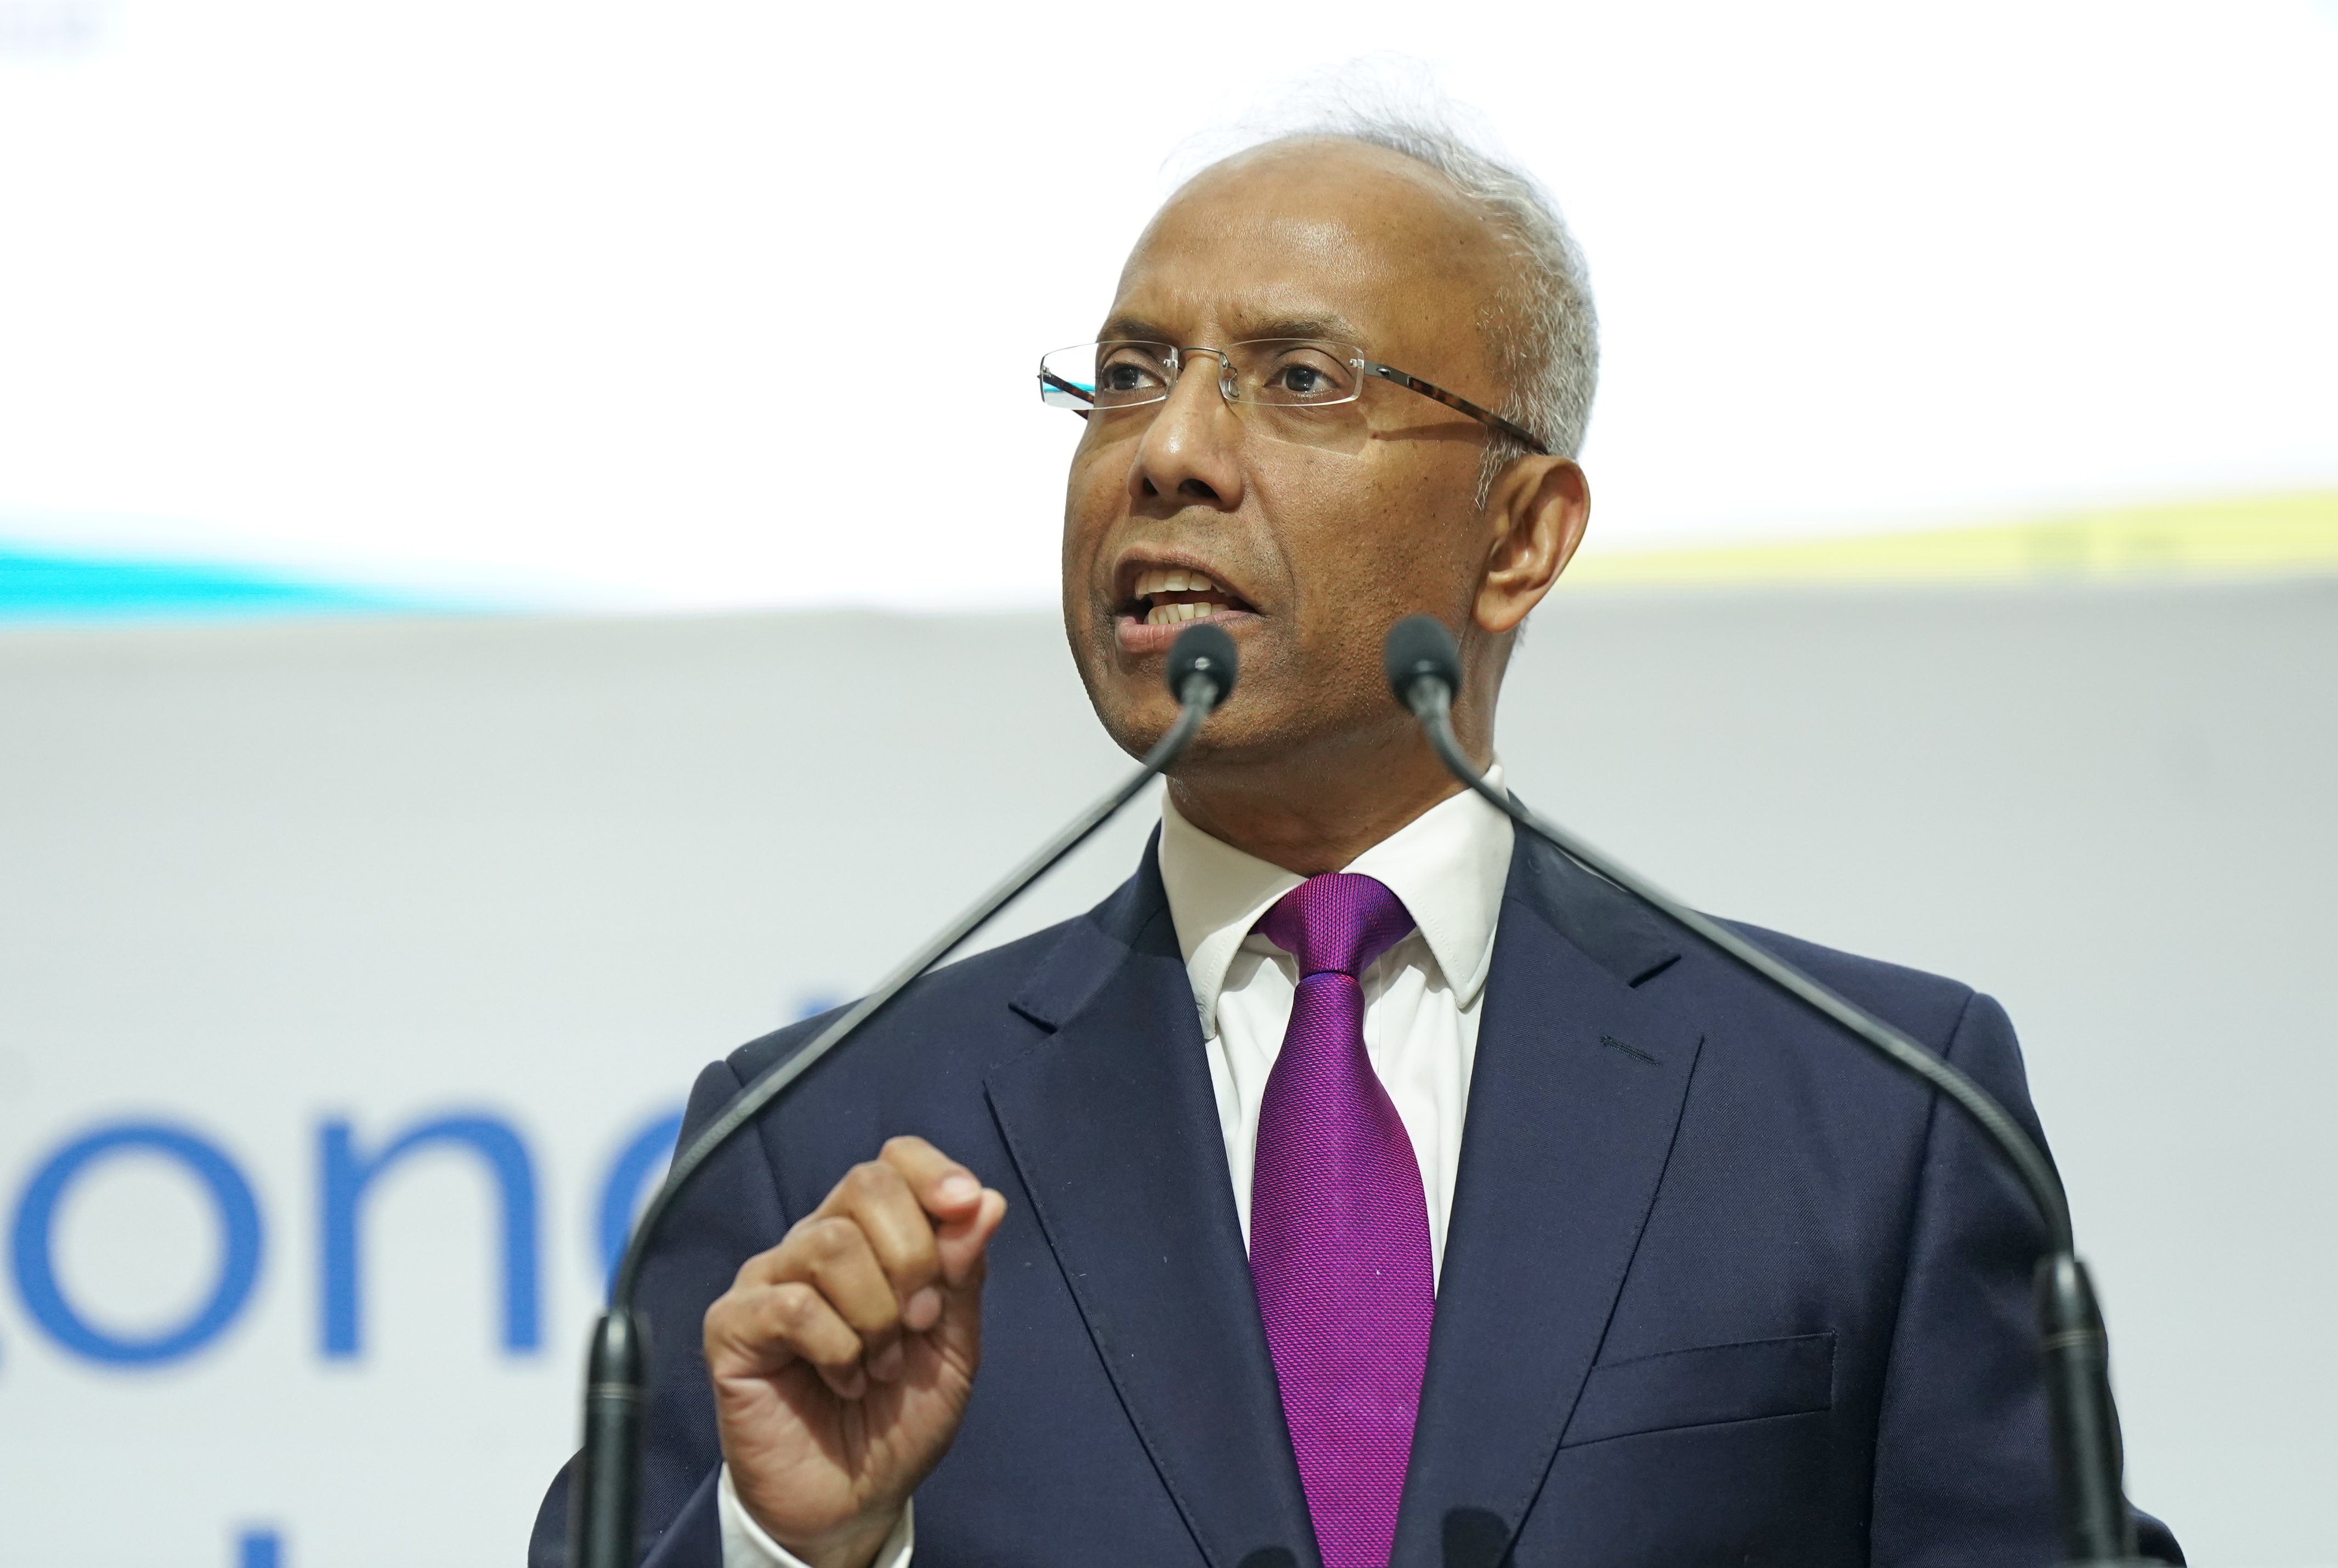 Lutfur Rahman has been elected once more as mayor for Tower Hamlets